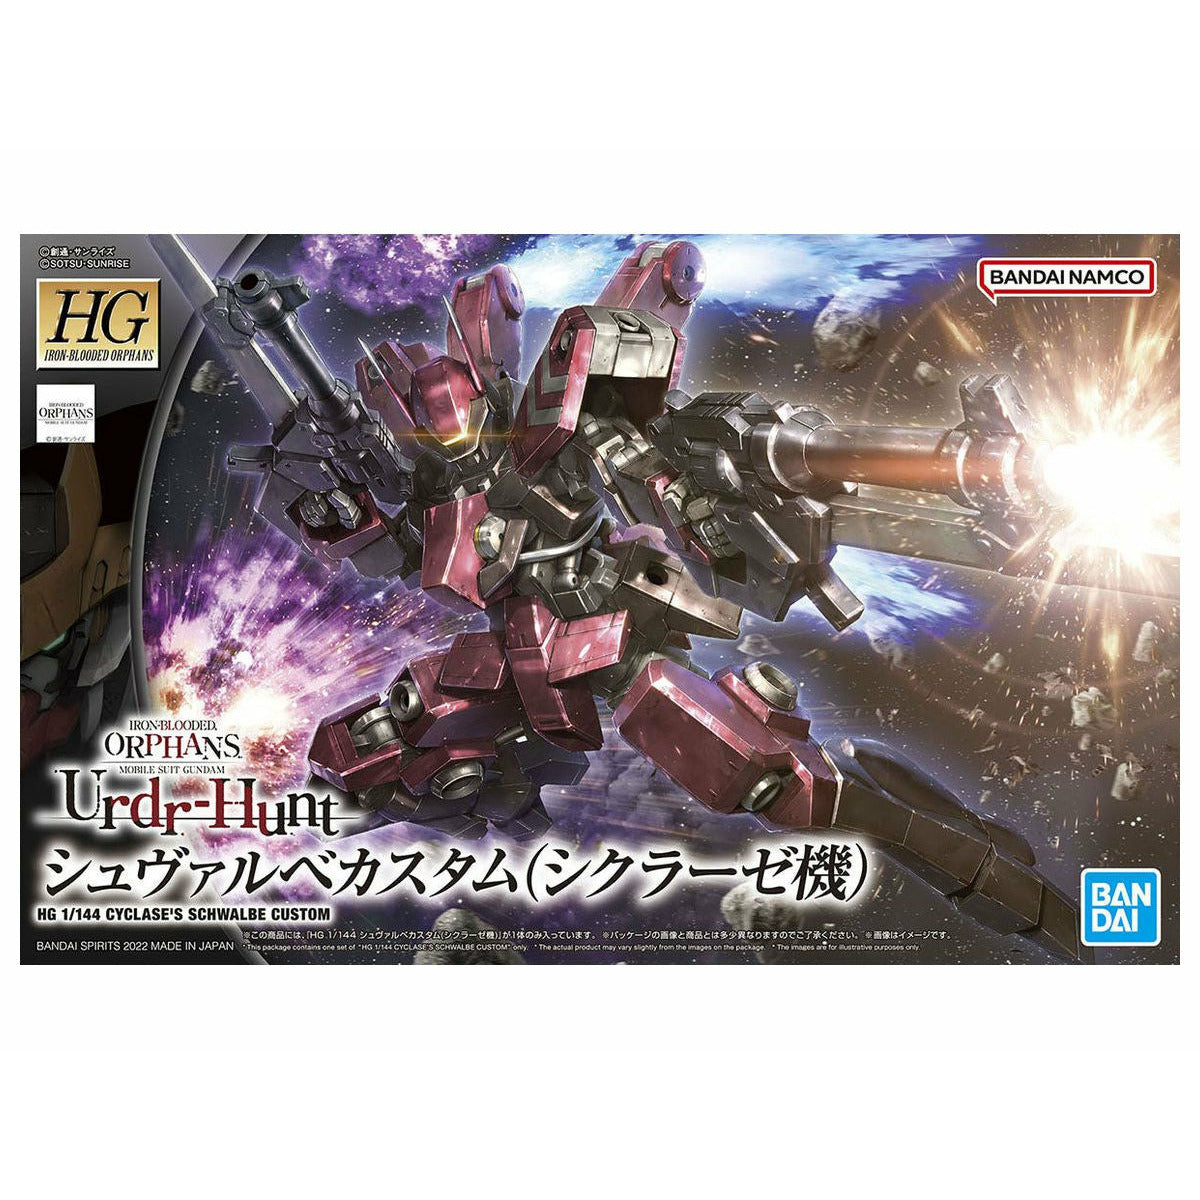 HG 1/144 Iron-Blooded Orphans #44 Cyclase's Schwalbe Graze #5063781 by Bandai